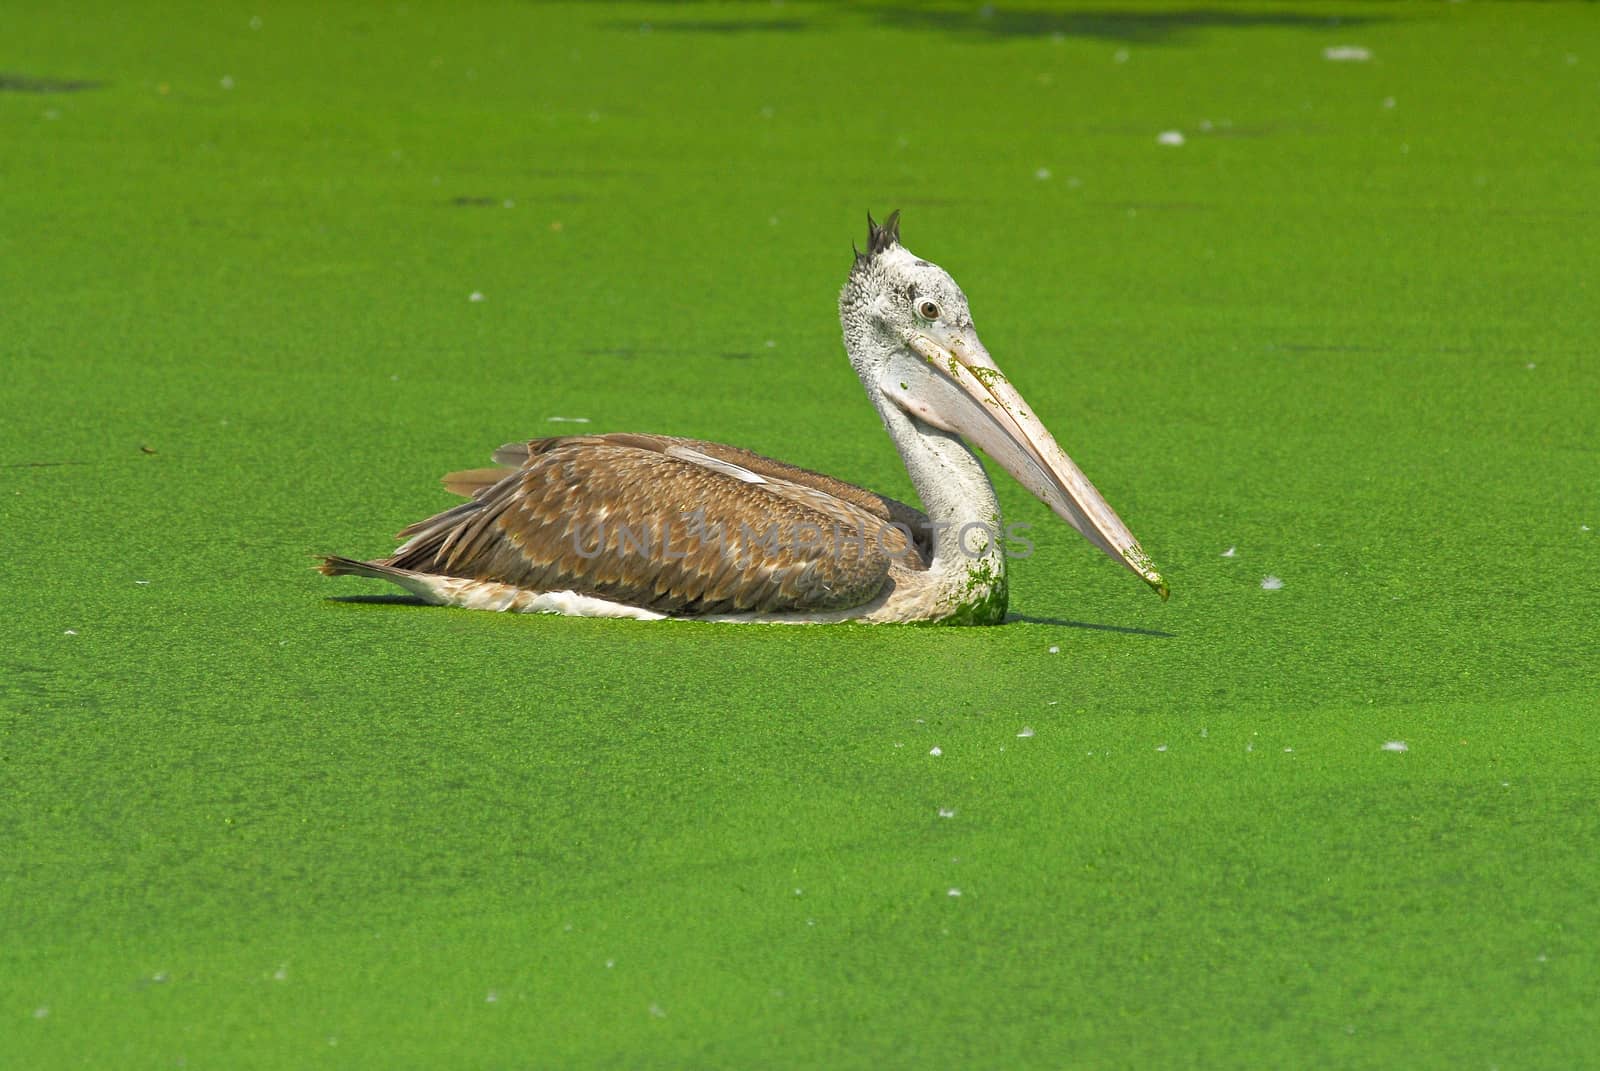 Spot Billed Pelican by think4photop